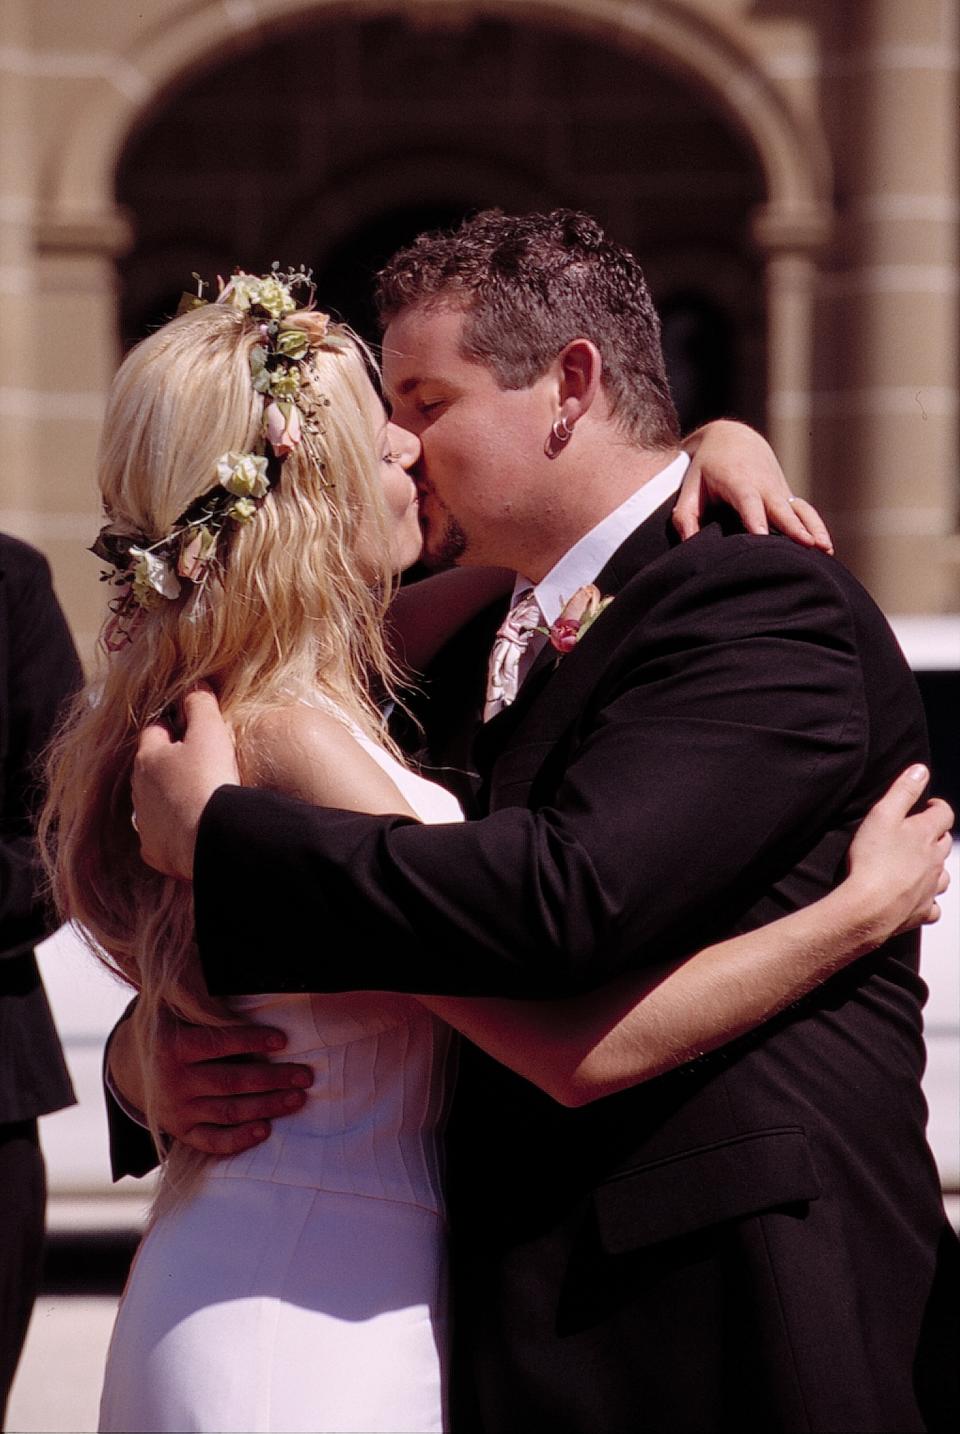 2. Dee Bliss and Toadie Rebecchi